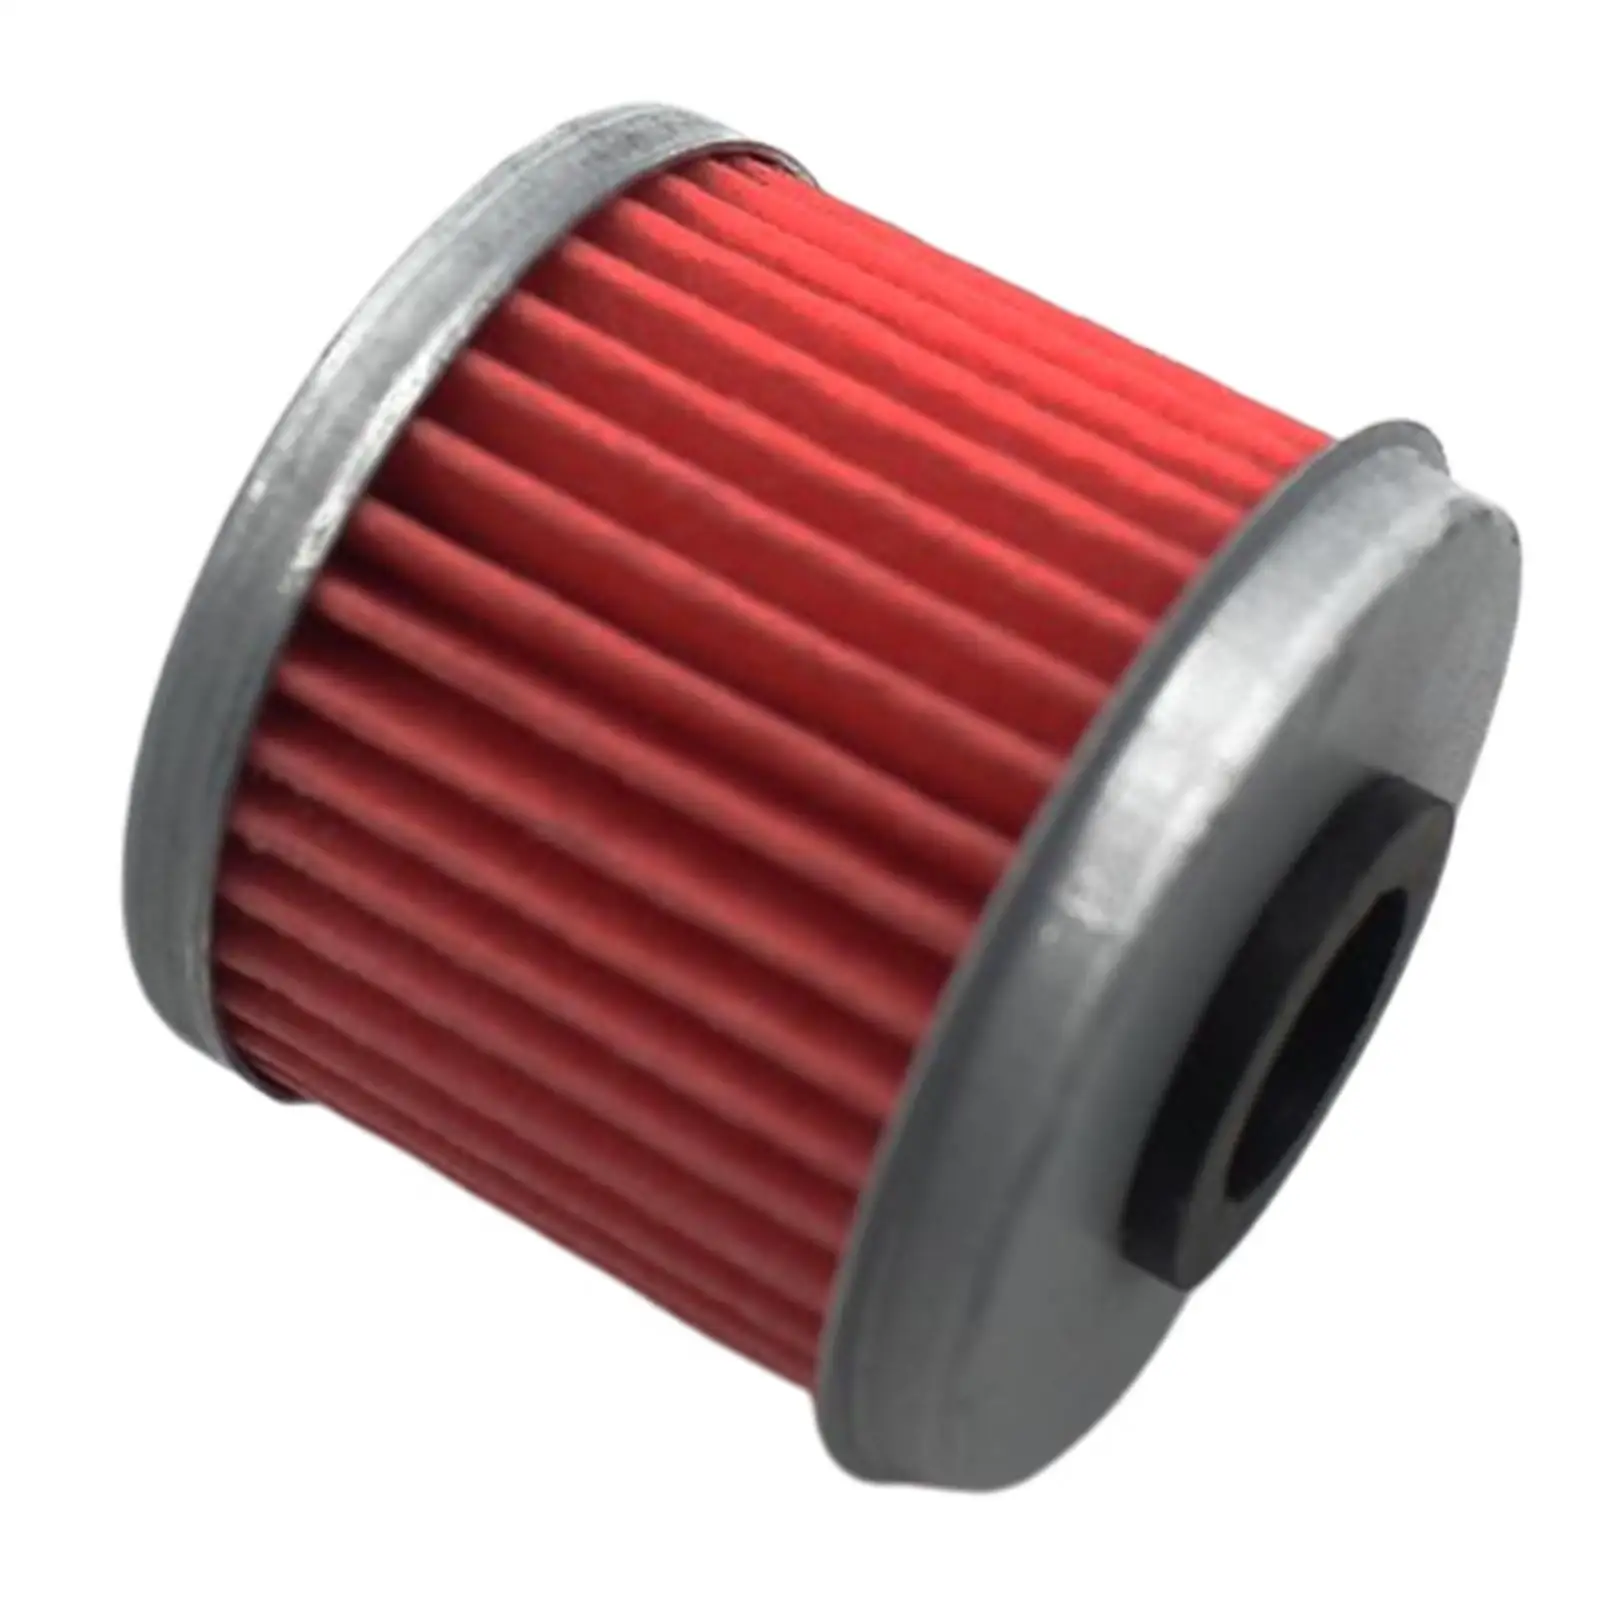 Oil Filter Fit for Honda NC700 S Dct Spare Parts Accessories Easy to Install 15412-Mgs-D21